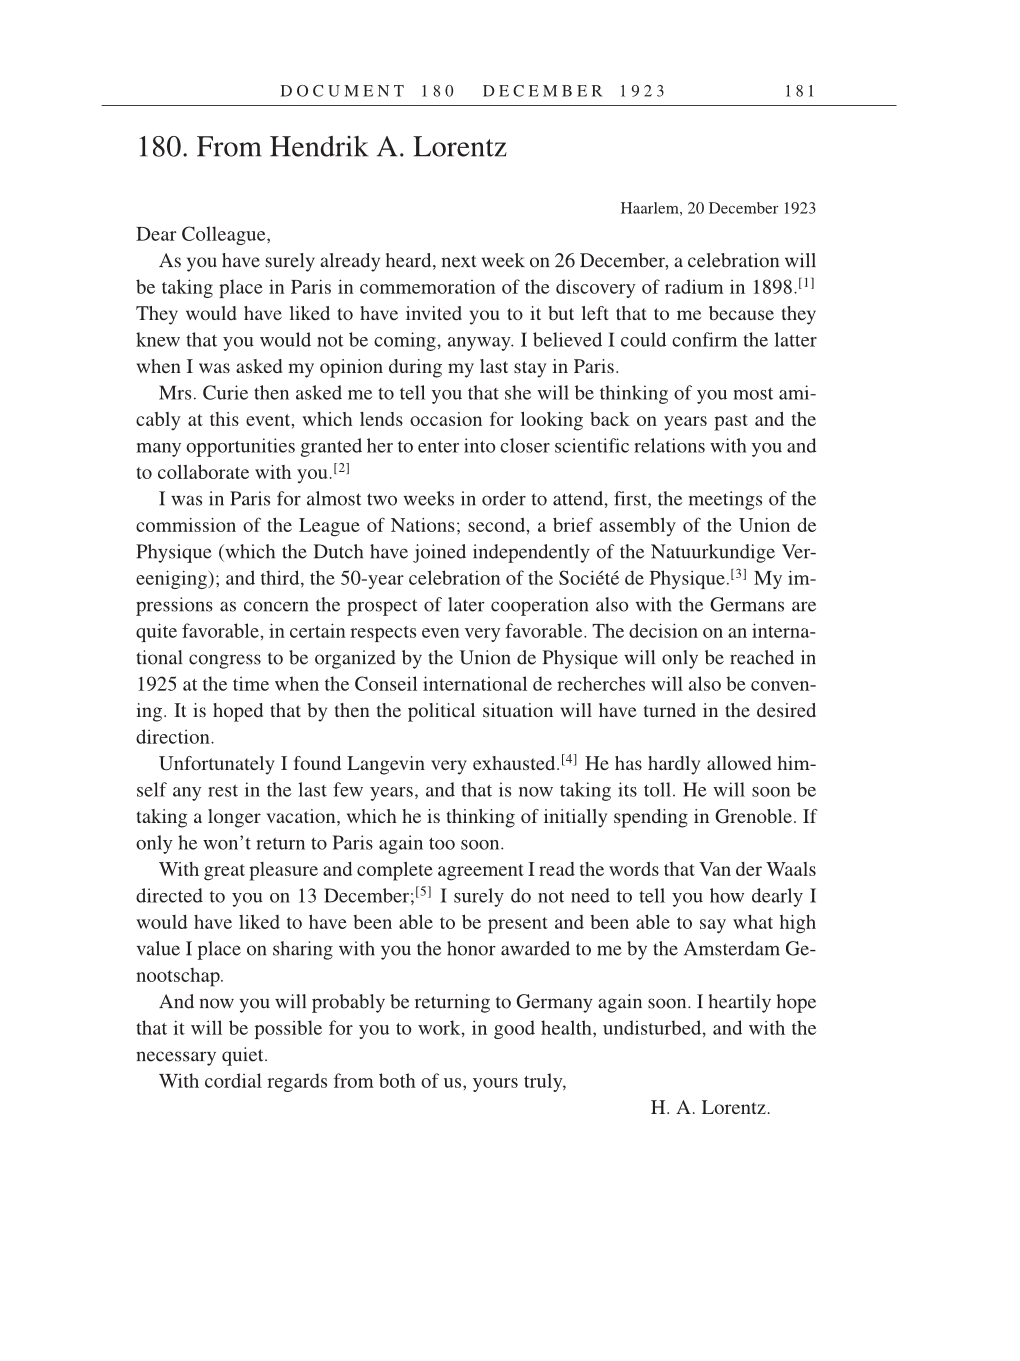 Volume 14: The Berlin Years: Writings & Correspondence, April 1923-May 1925 (English Translation Supplement) page 181